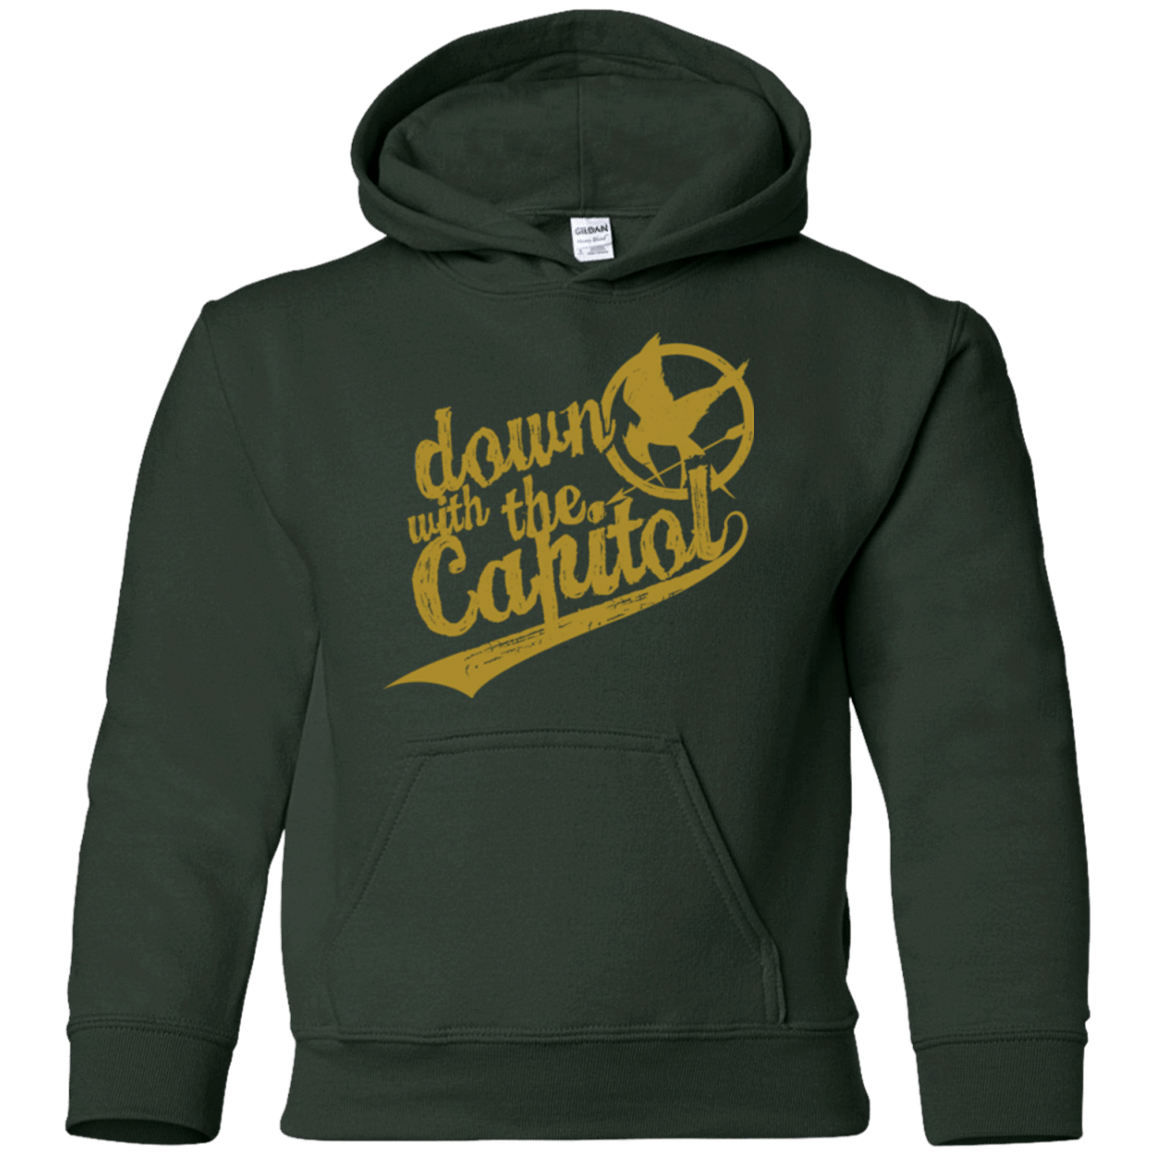 Sweatshirts Forest Green / YS Down with the Capitol Youth Hoodie